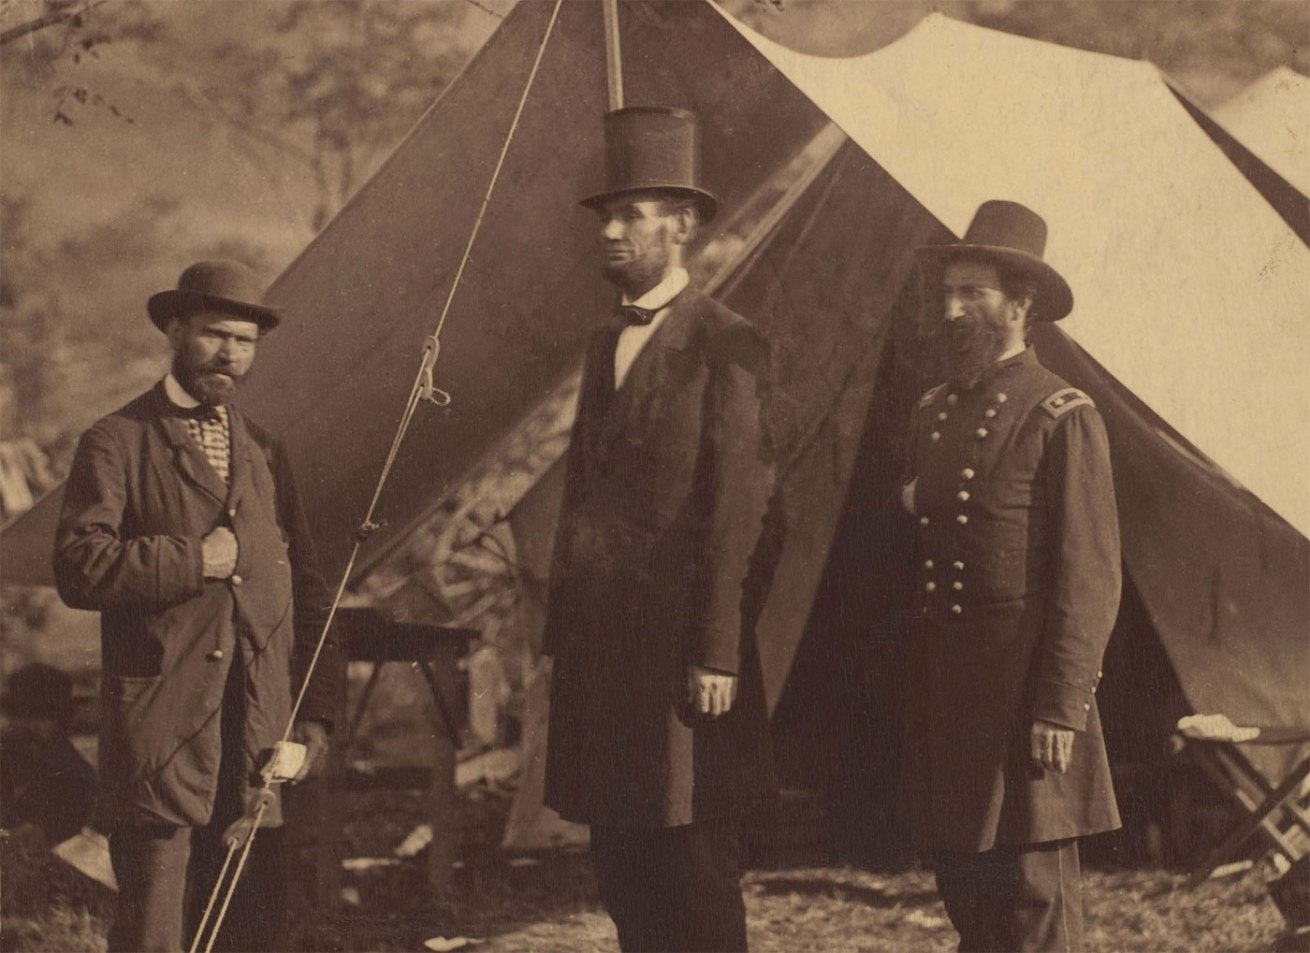 Fotó: Alexander Gardner (American, Glasgow, Scotland 1821-1882 Washington, D.C.;)<br />[President Abraham Lincoln, Major General John A. McClernand (right), and E. J. Allen (Allan Pinkerton, left), Chief of the Secret Service of the United States, at Secret Service Department, Headquarters Army of the Potomac, near Antietam, Maryland] (detail)<br />October 4, 1862<br />Albumen silver print from glass negative<br />The Metropolitan Museum of Art, Gilman Collection, Gift of The Howard Gilman Foundation, 2005<br />Copy Photograph © The Metropolitan Museum of Art